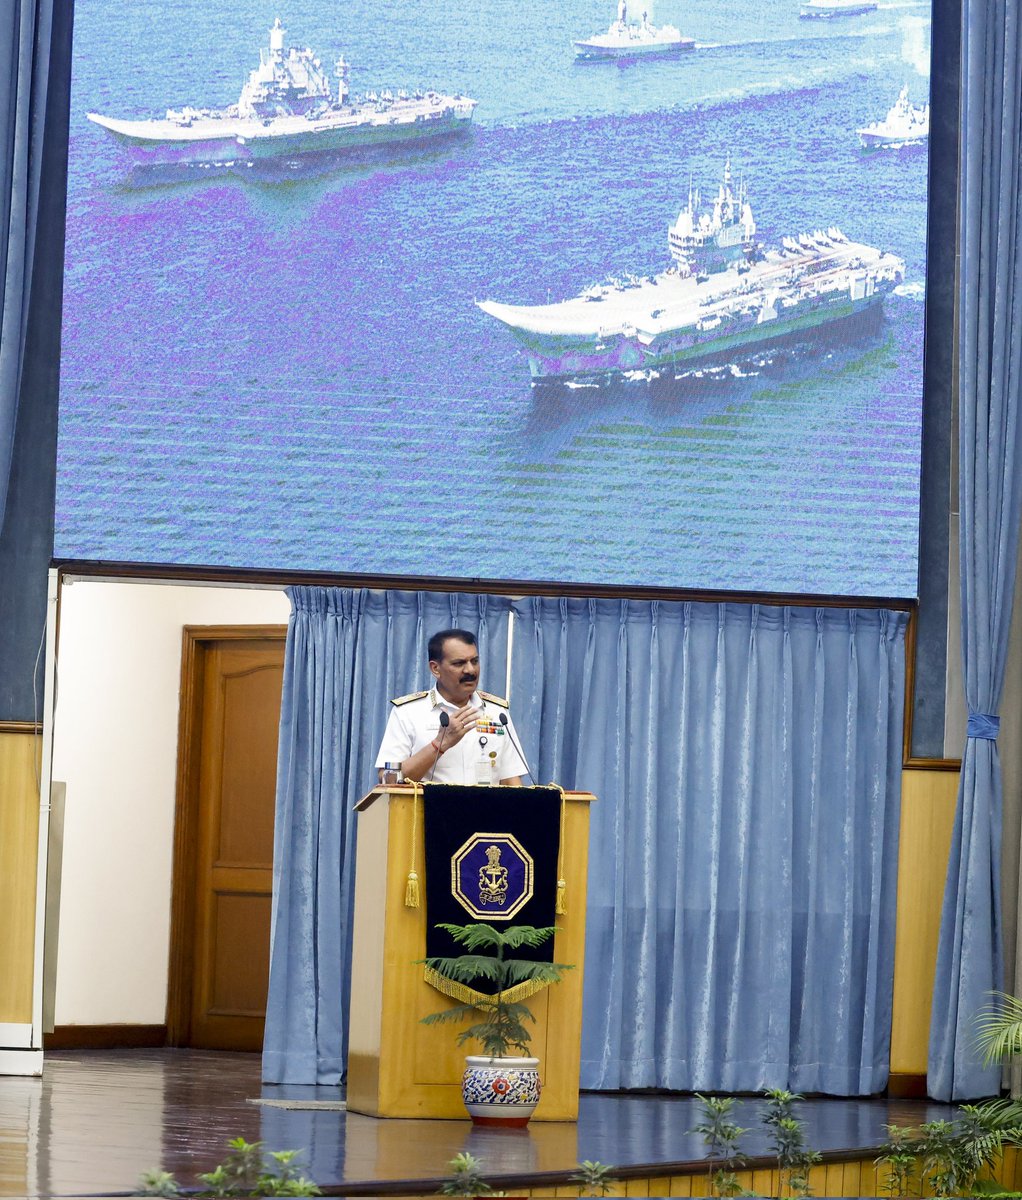 Adm Dinesh K Tripathi #CNS made his maiden address to officers posted in Naval Headquarters #NHQ, New Delhi on #21May 24. #CNS emphasised that as the primary manifestation of India’s maritime power, the raison d’etre of #IndianNavy is to remain #CombatReady at all times to